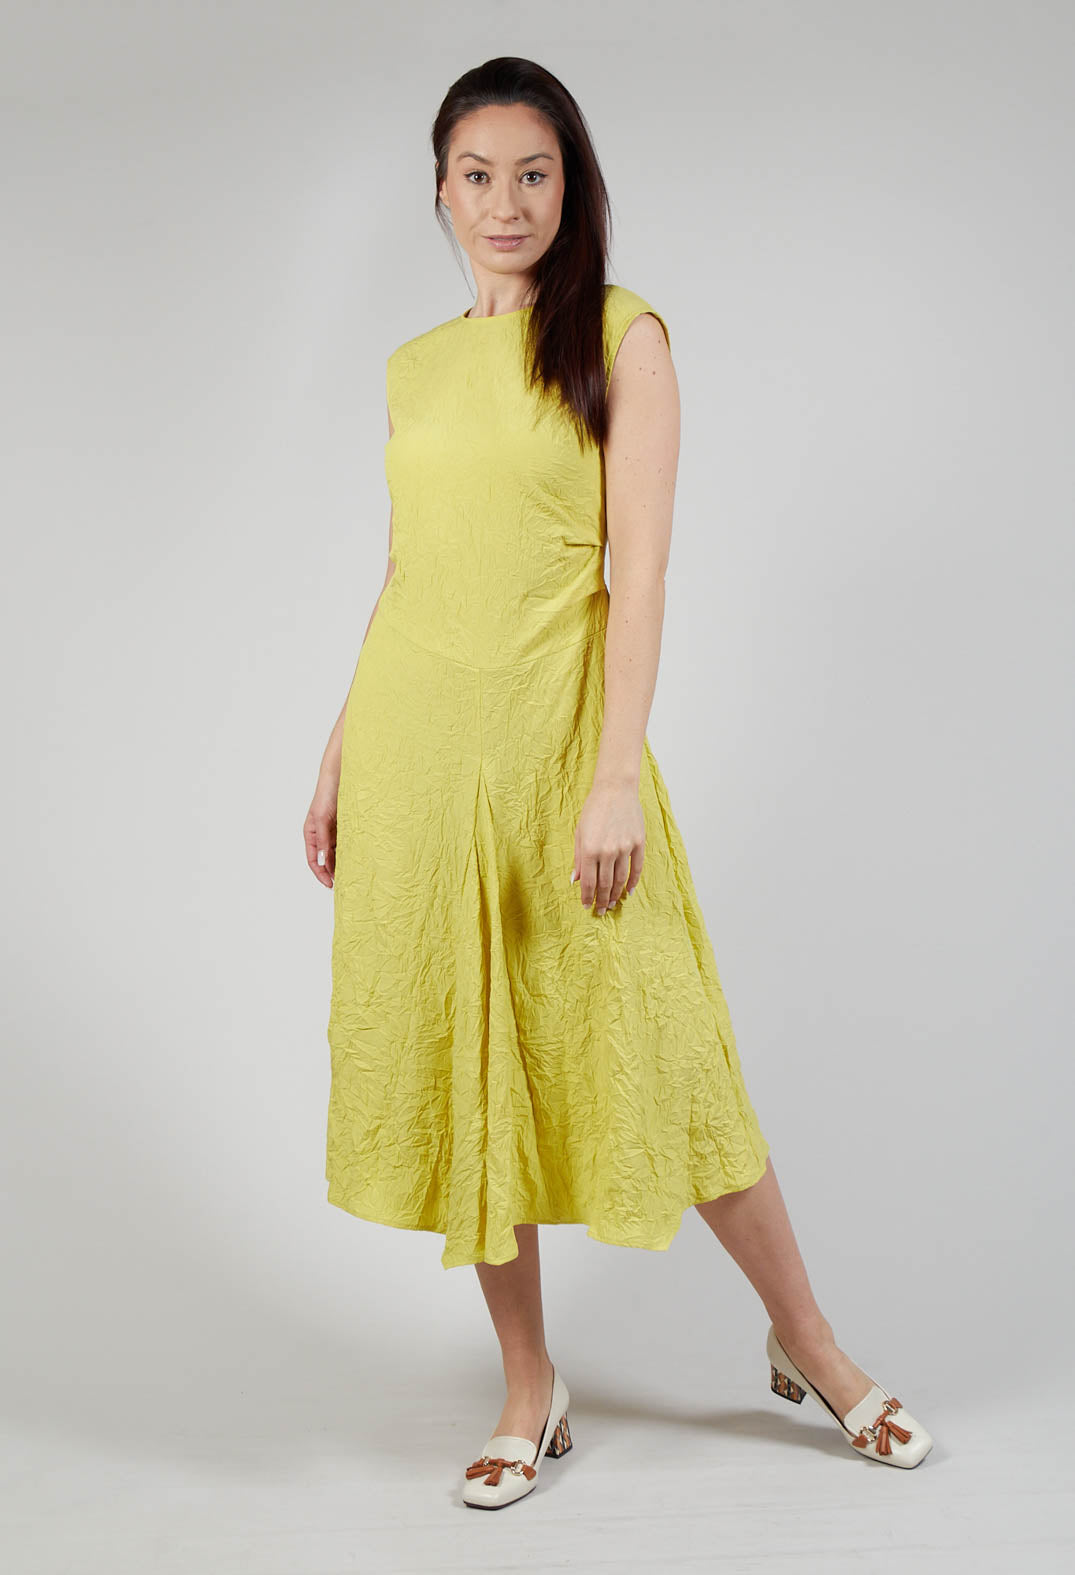 Creased Cotton Dress in Apple Green